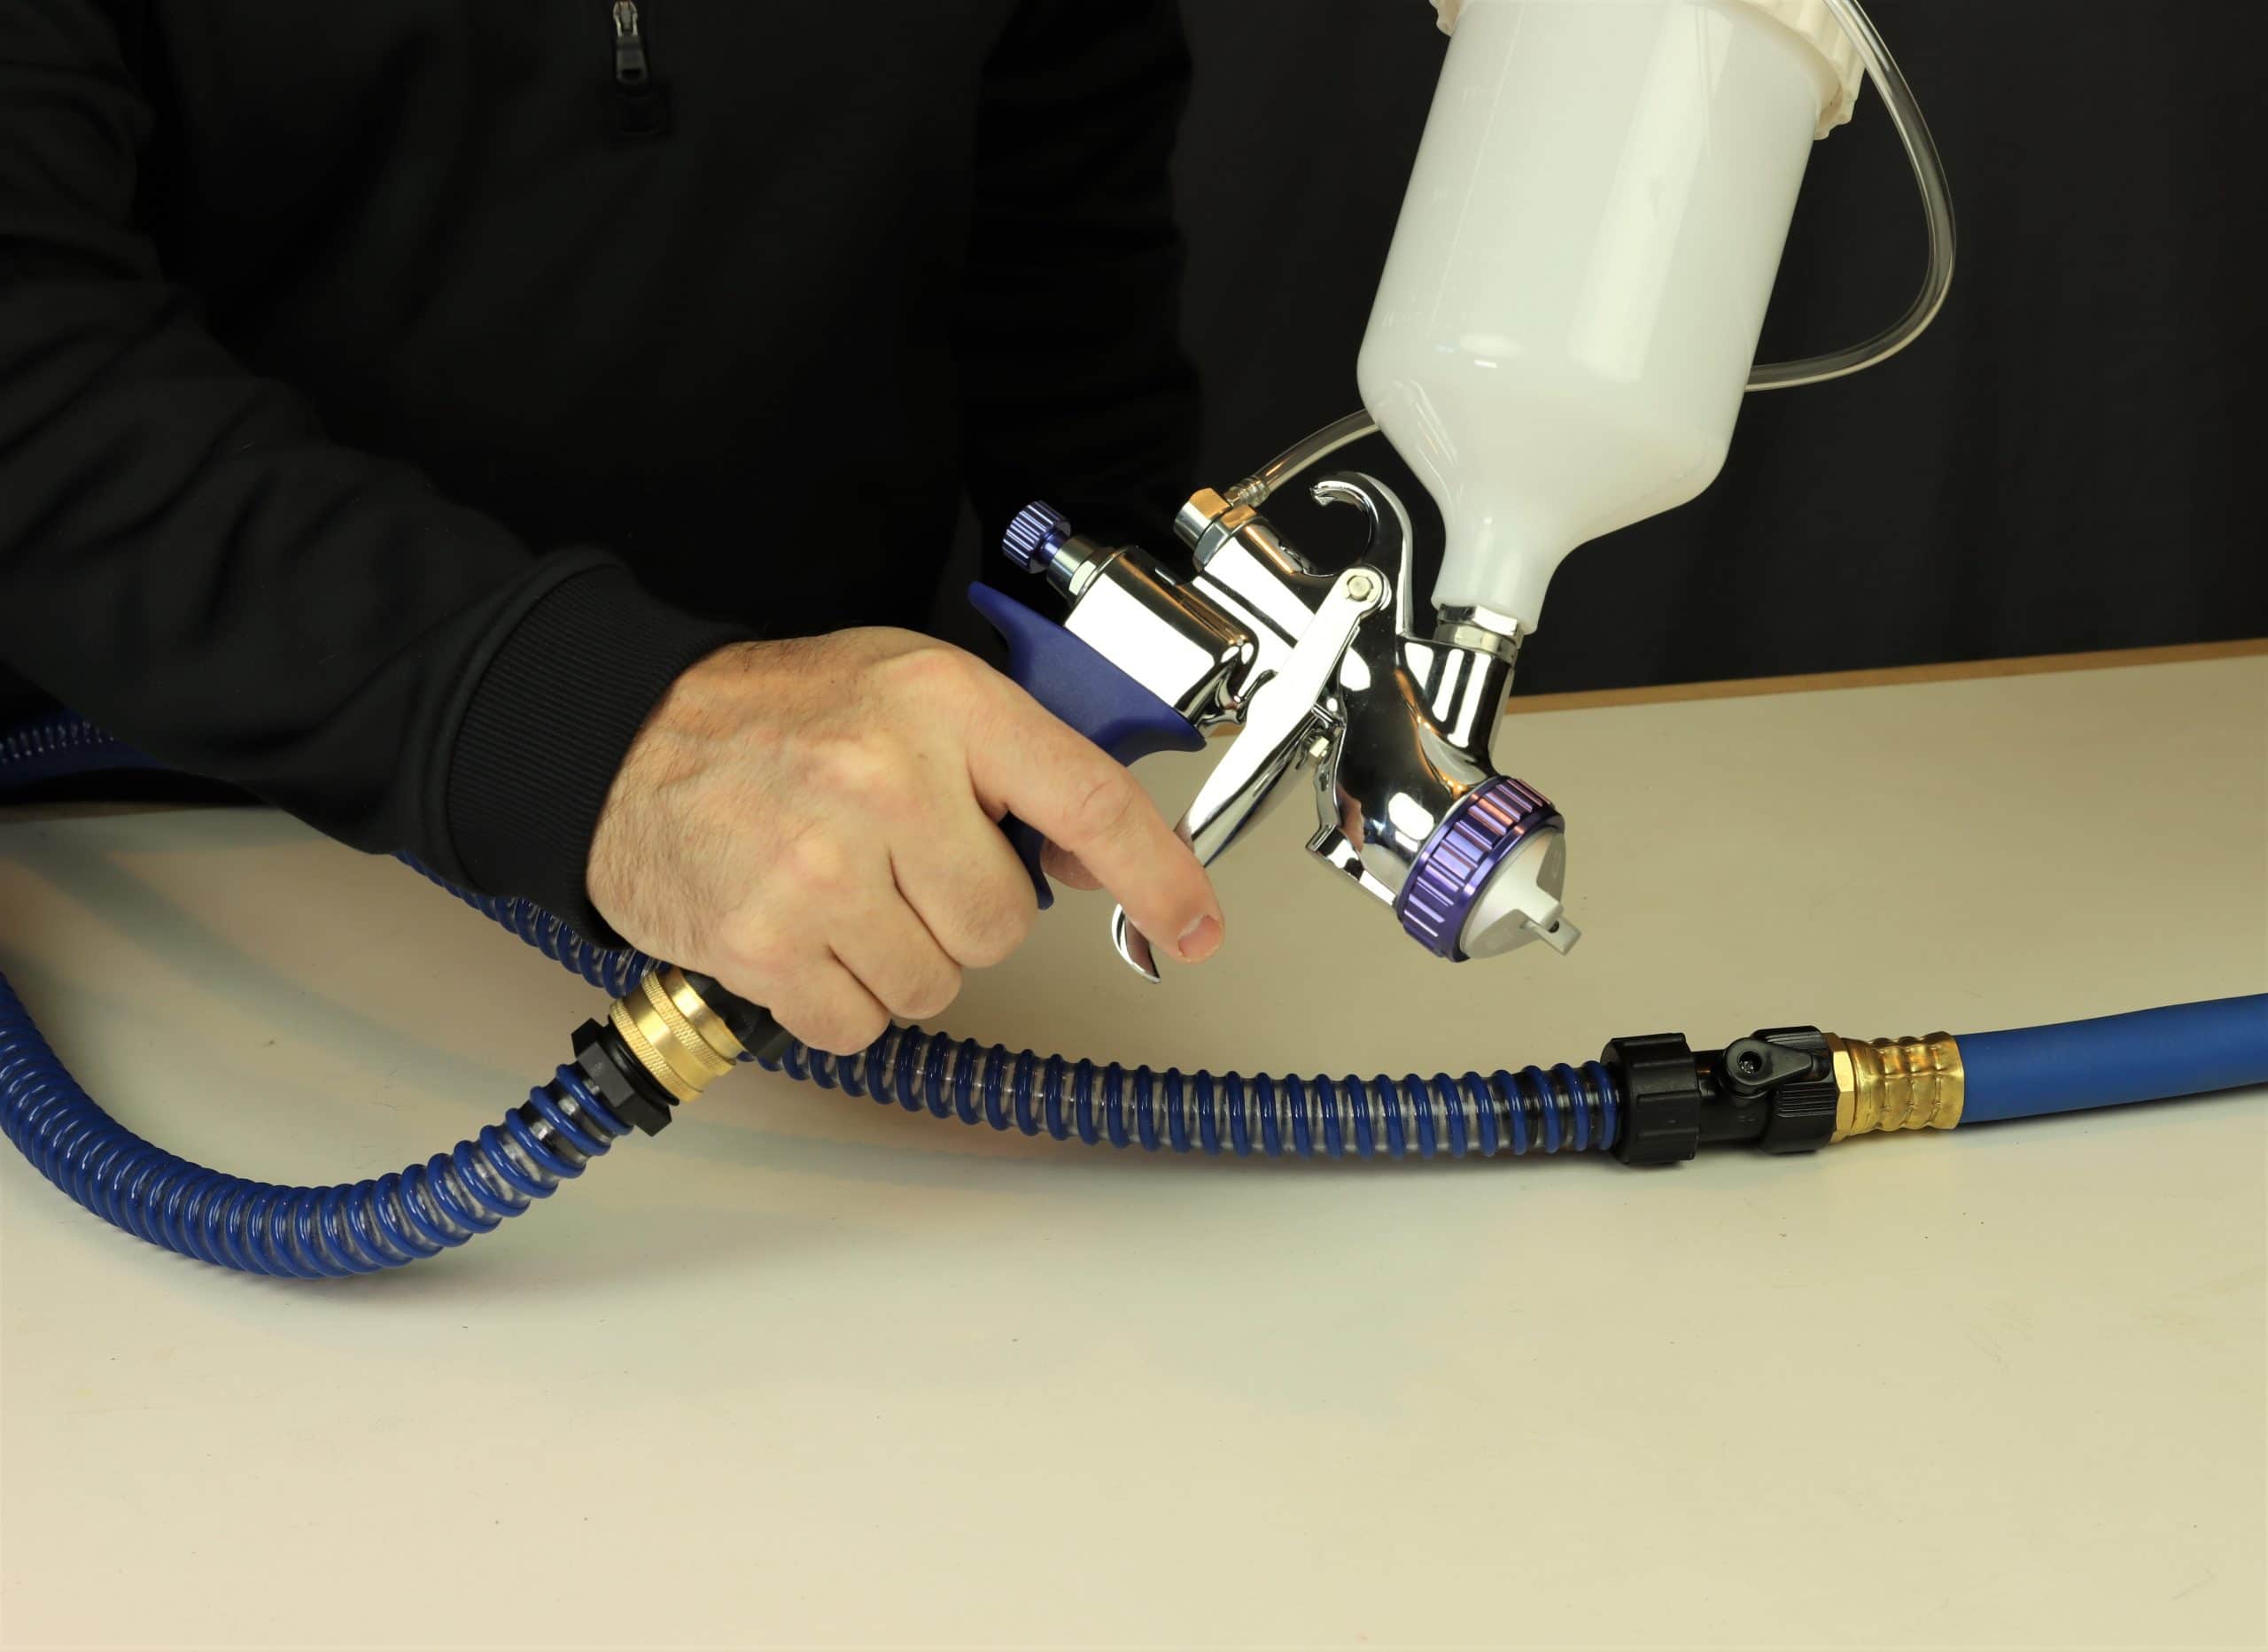 Fuji Mini Mite 3 + GXPC HVLP Spray Gun Features and Benefits of Turbine  System and Paint Sprayer 